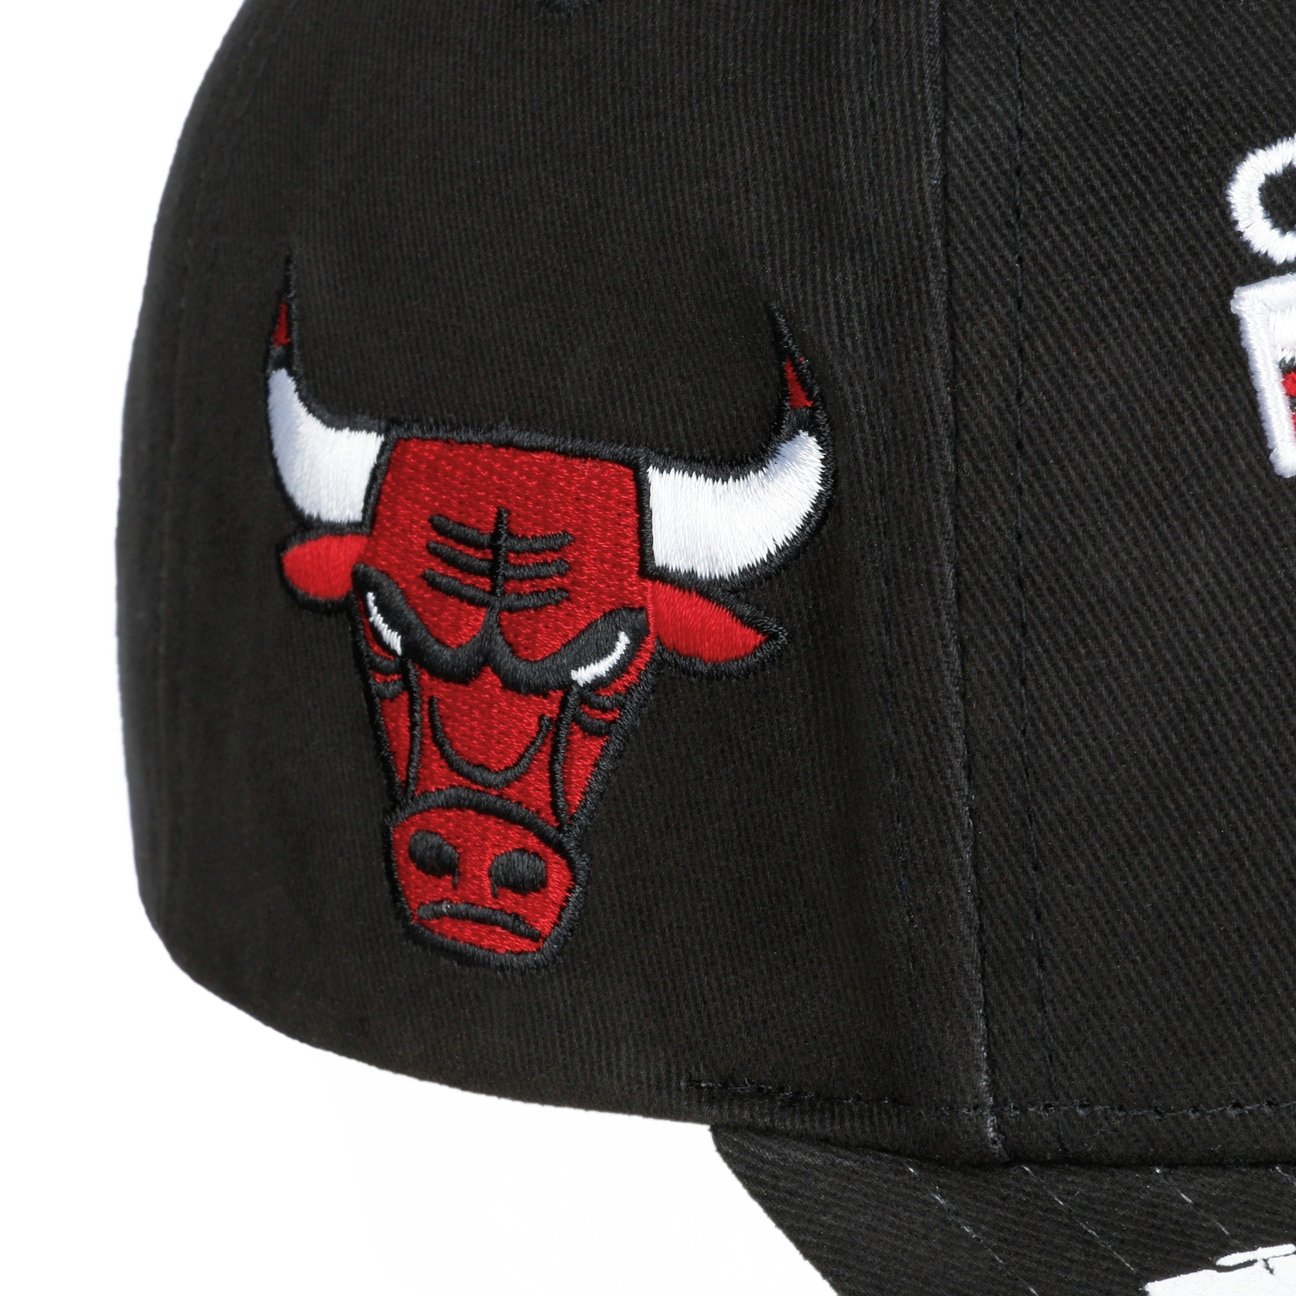 Chicago Bulls Snapback Cap by Mitchell & Ness --> Shop Hats, Beanies & Caps  online ▷ Hatshopping